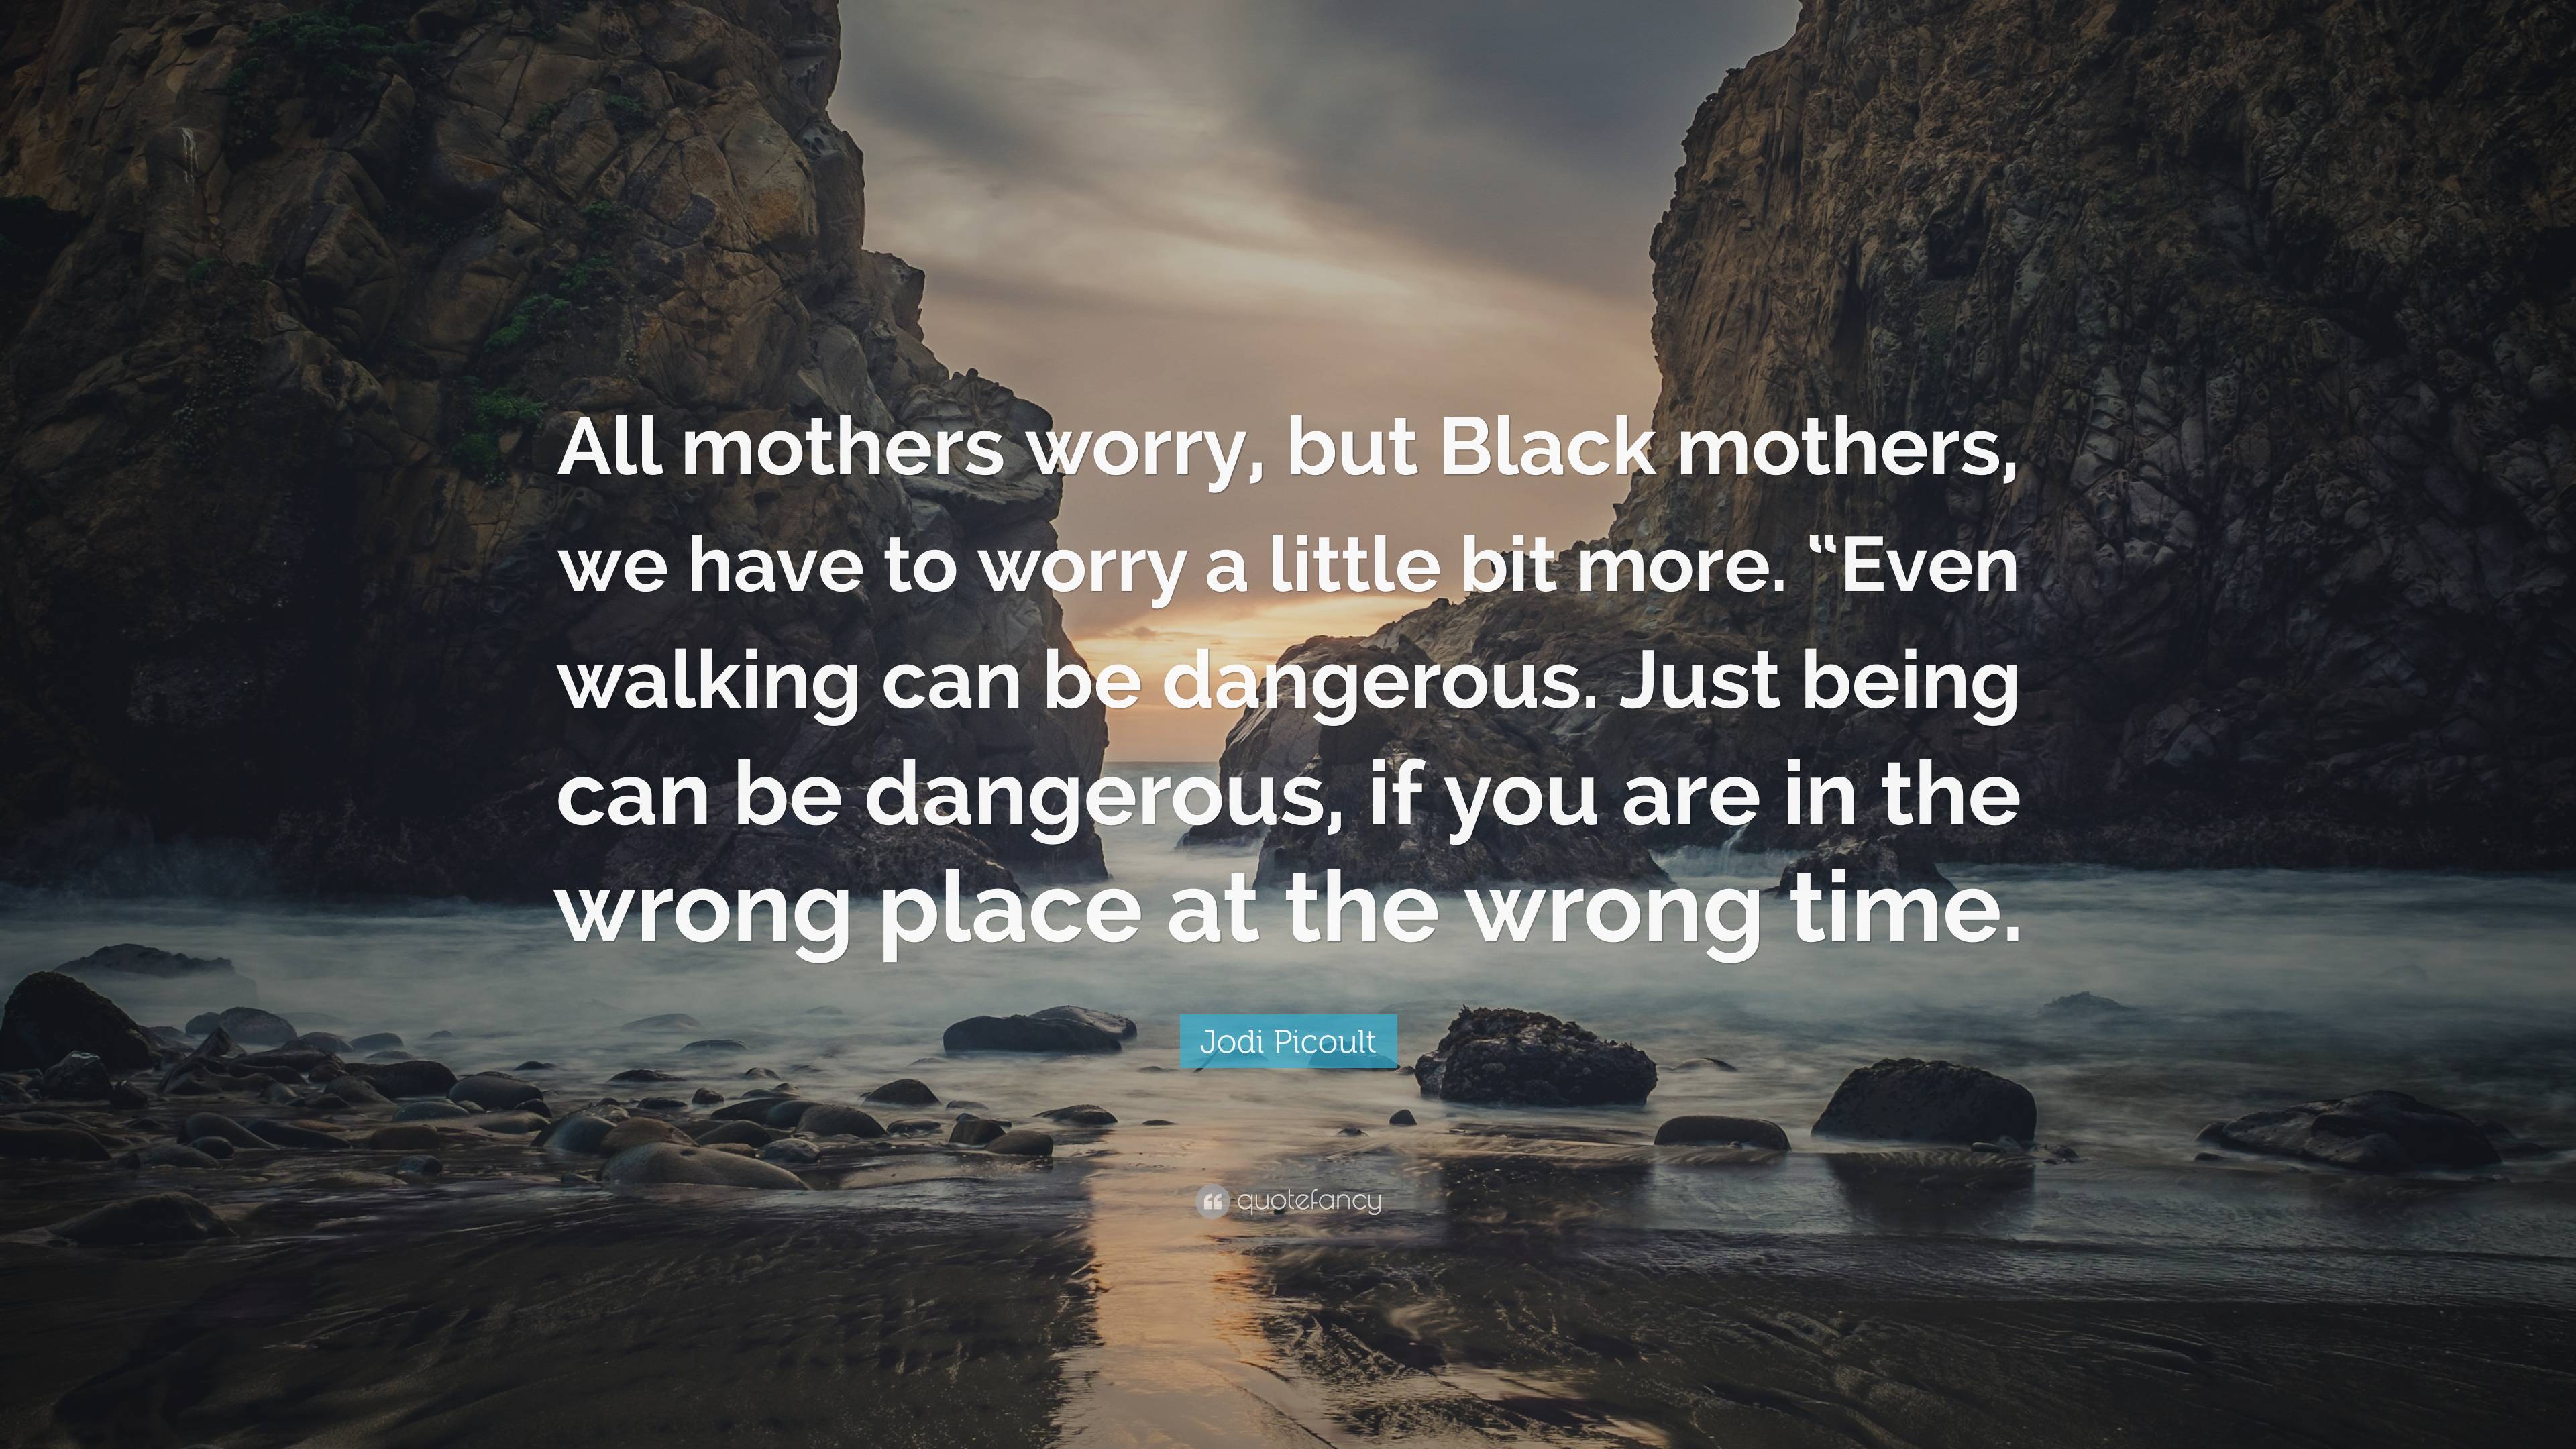 Jodi Picoult Quote: “All mothers worry, but Black mothers, we have to ...